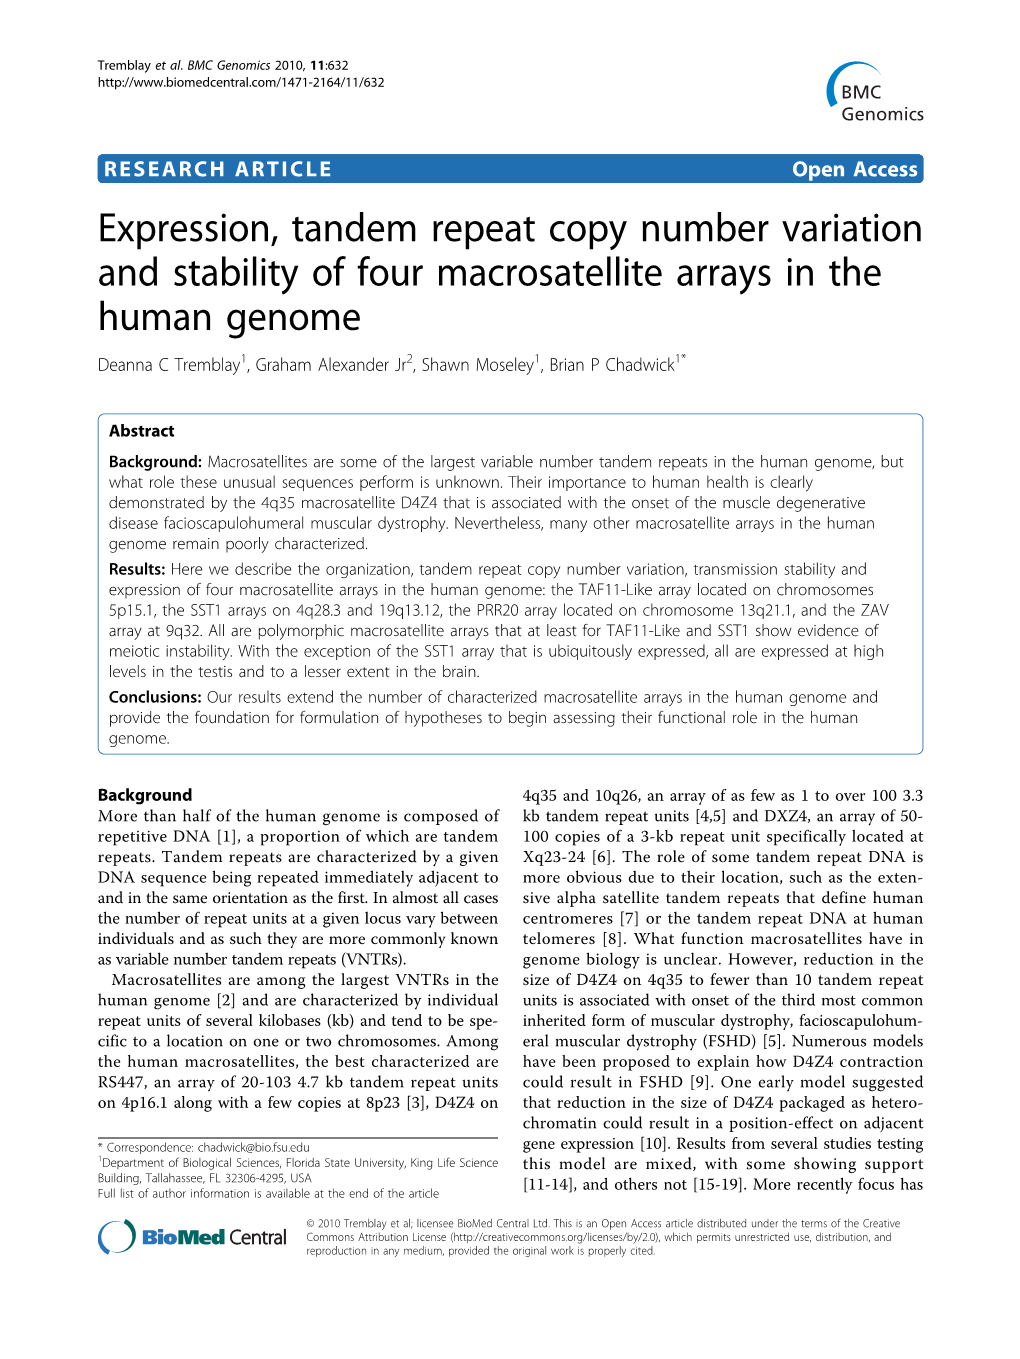 Expression, Tandem Repeat Copy Number Variation and Stability of Four Macrosatellite Arrays in the Human Genome